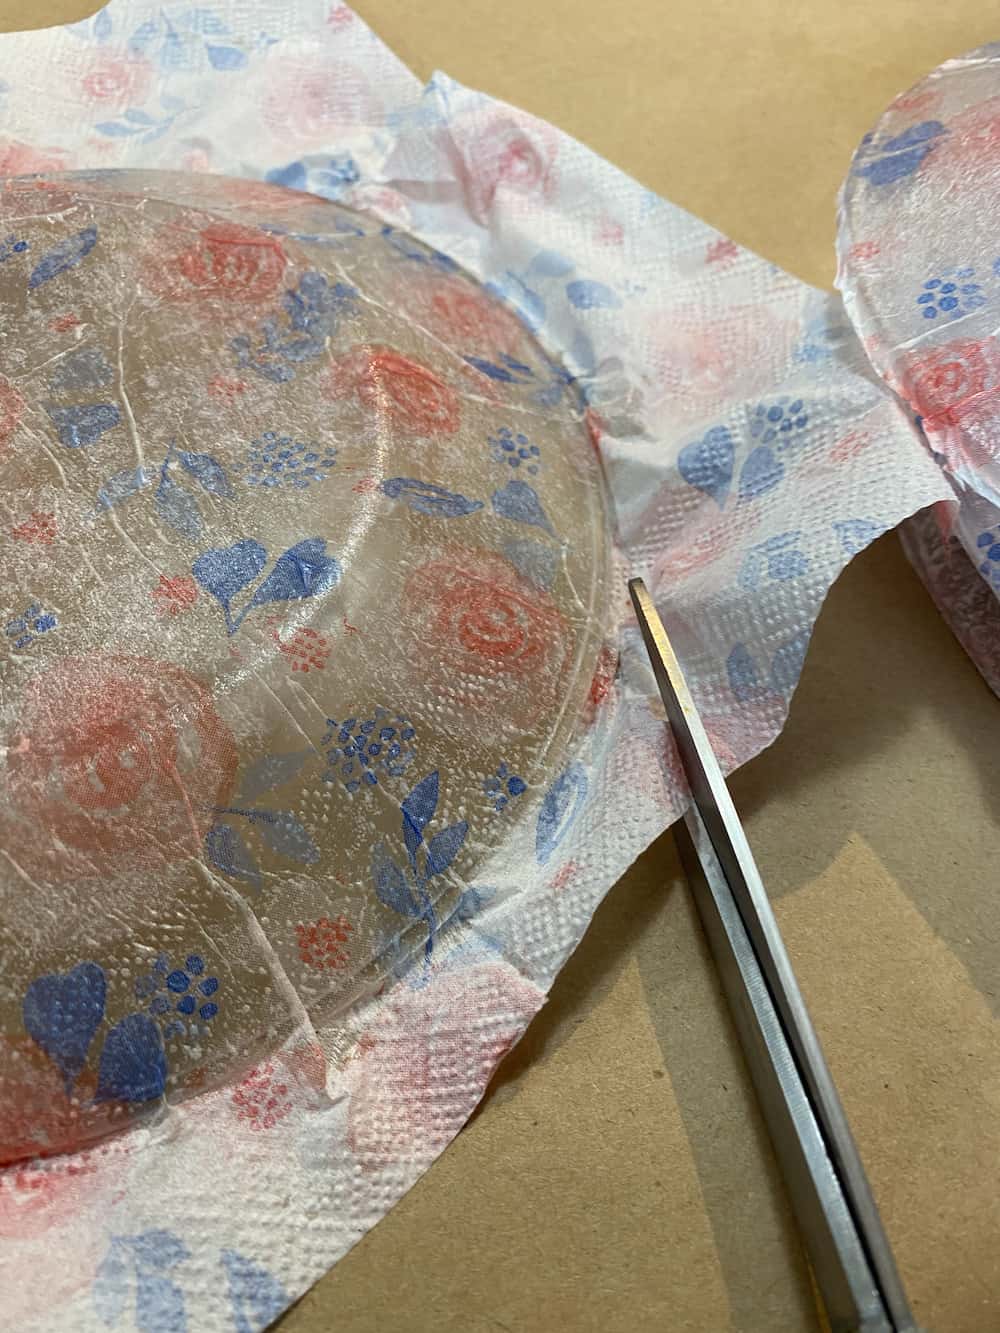 Trimming the paper napkin that has been decoupaged to a glass plate